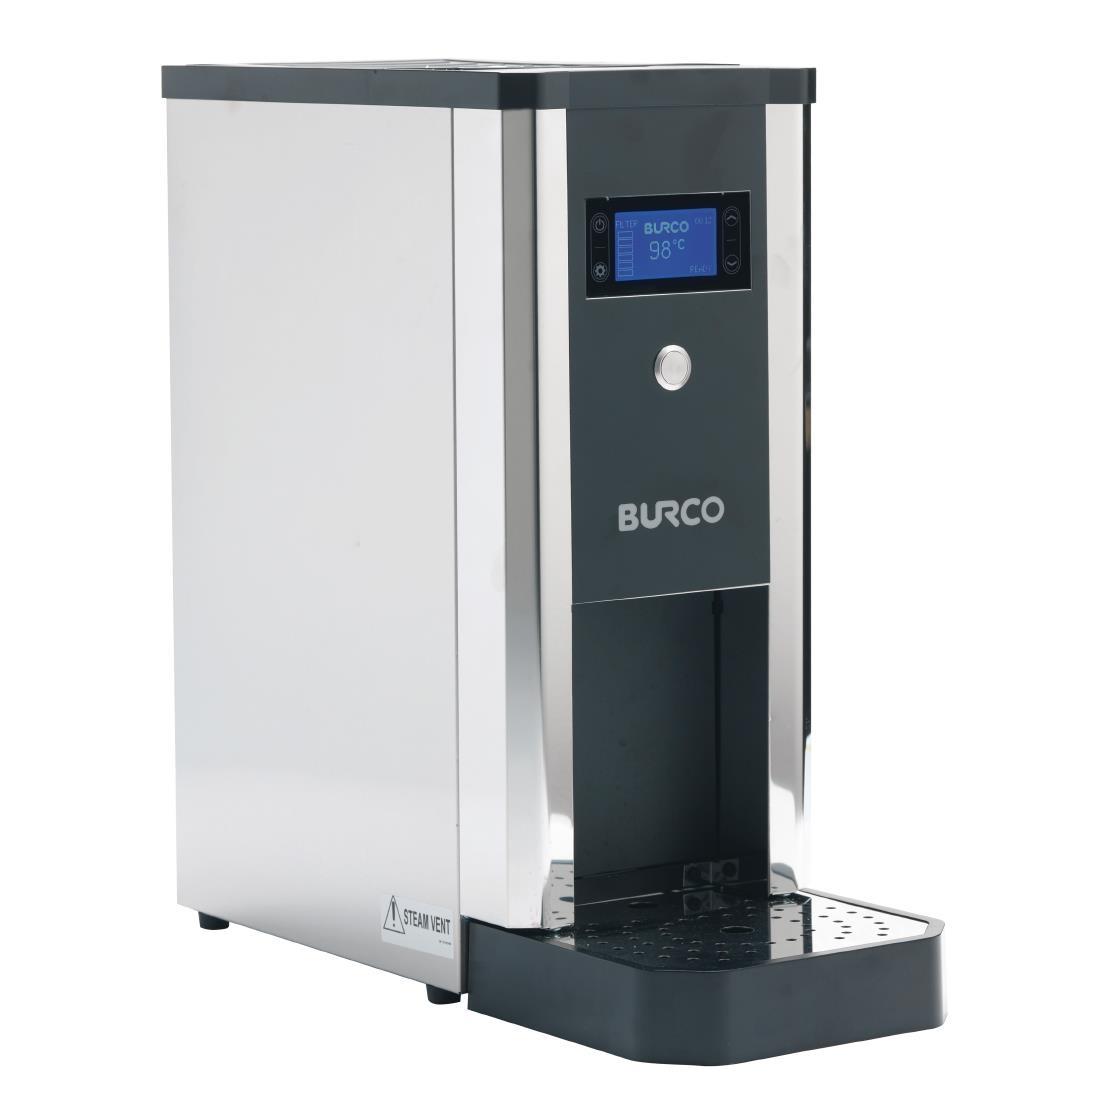 Burco Slimline 5Ltr Auto Fill Water Boiler with Filtration 70043 - DY436  - 2